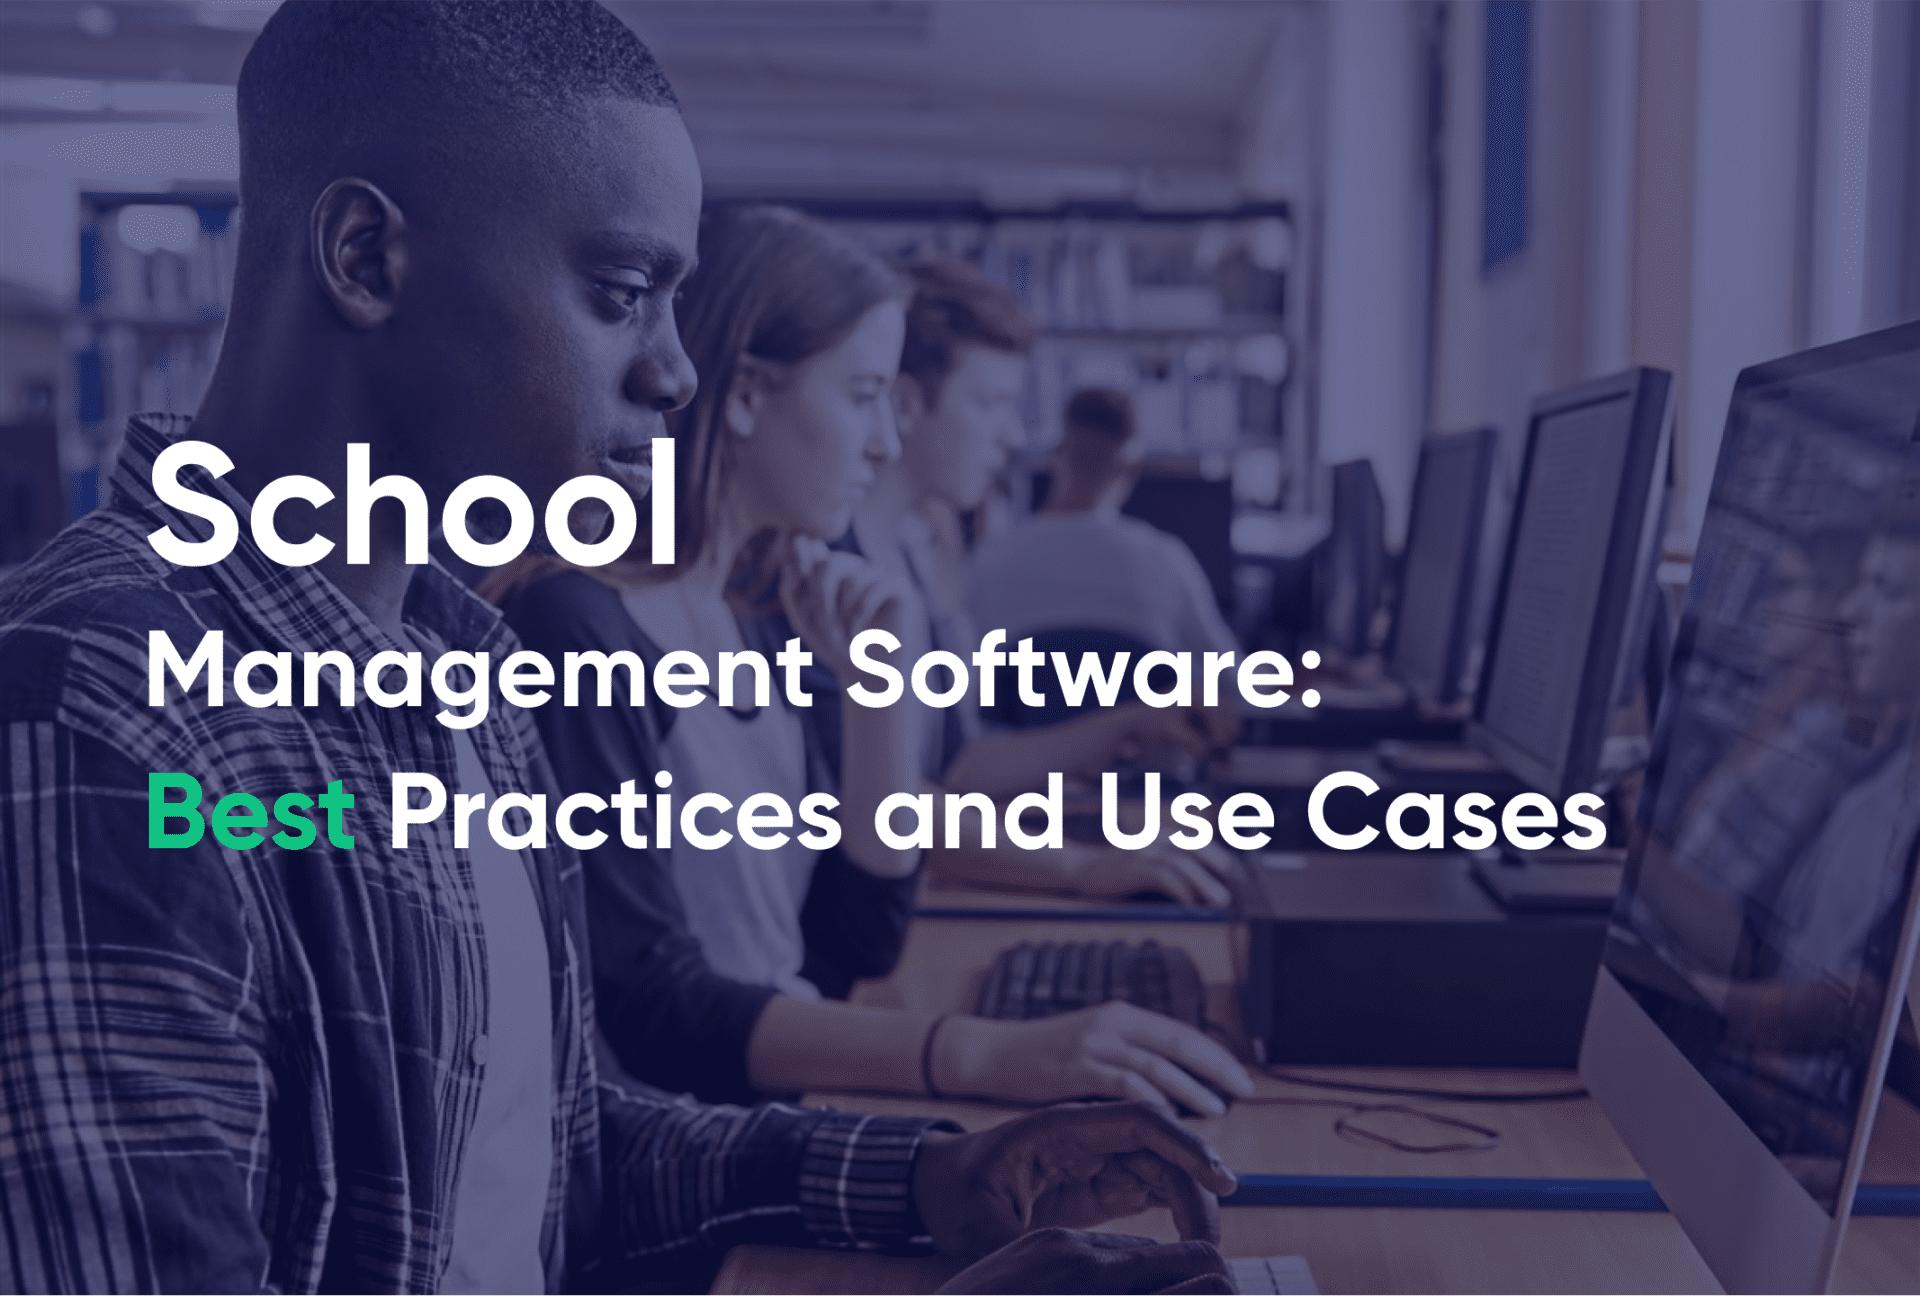 School Management Software Best Practices and Use Cases